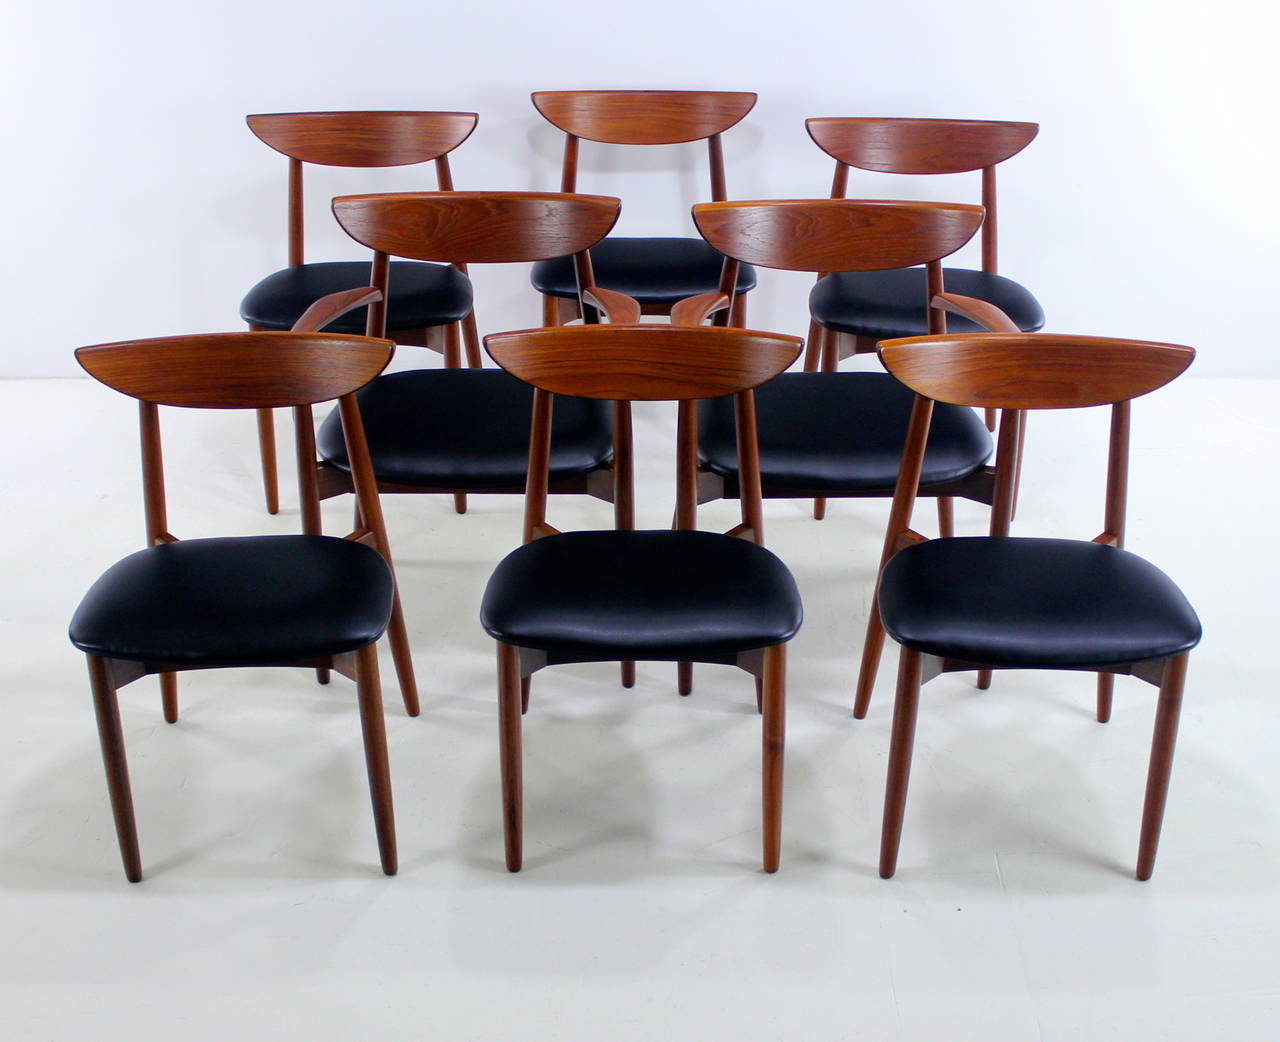 Eight dining chairs designed by Harry Ostergaard.
Six side chairs, two-arm chairs measuring 24